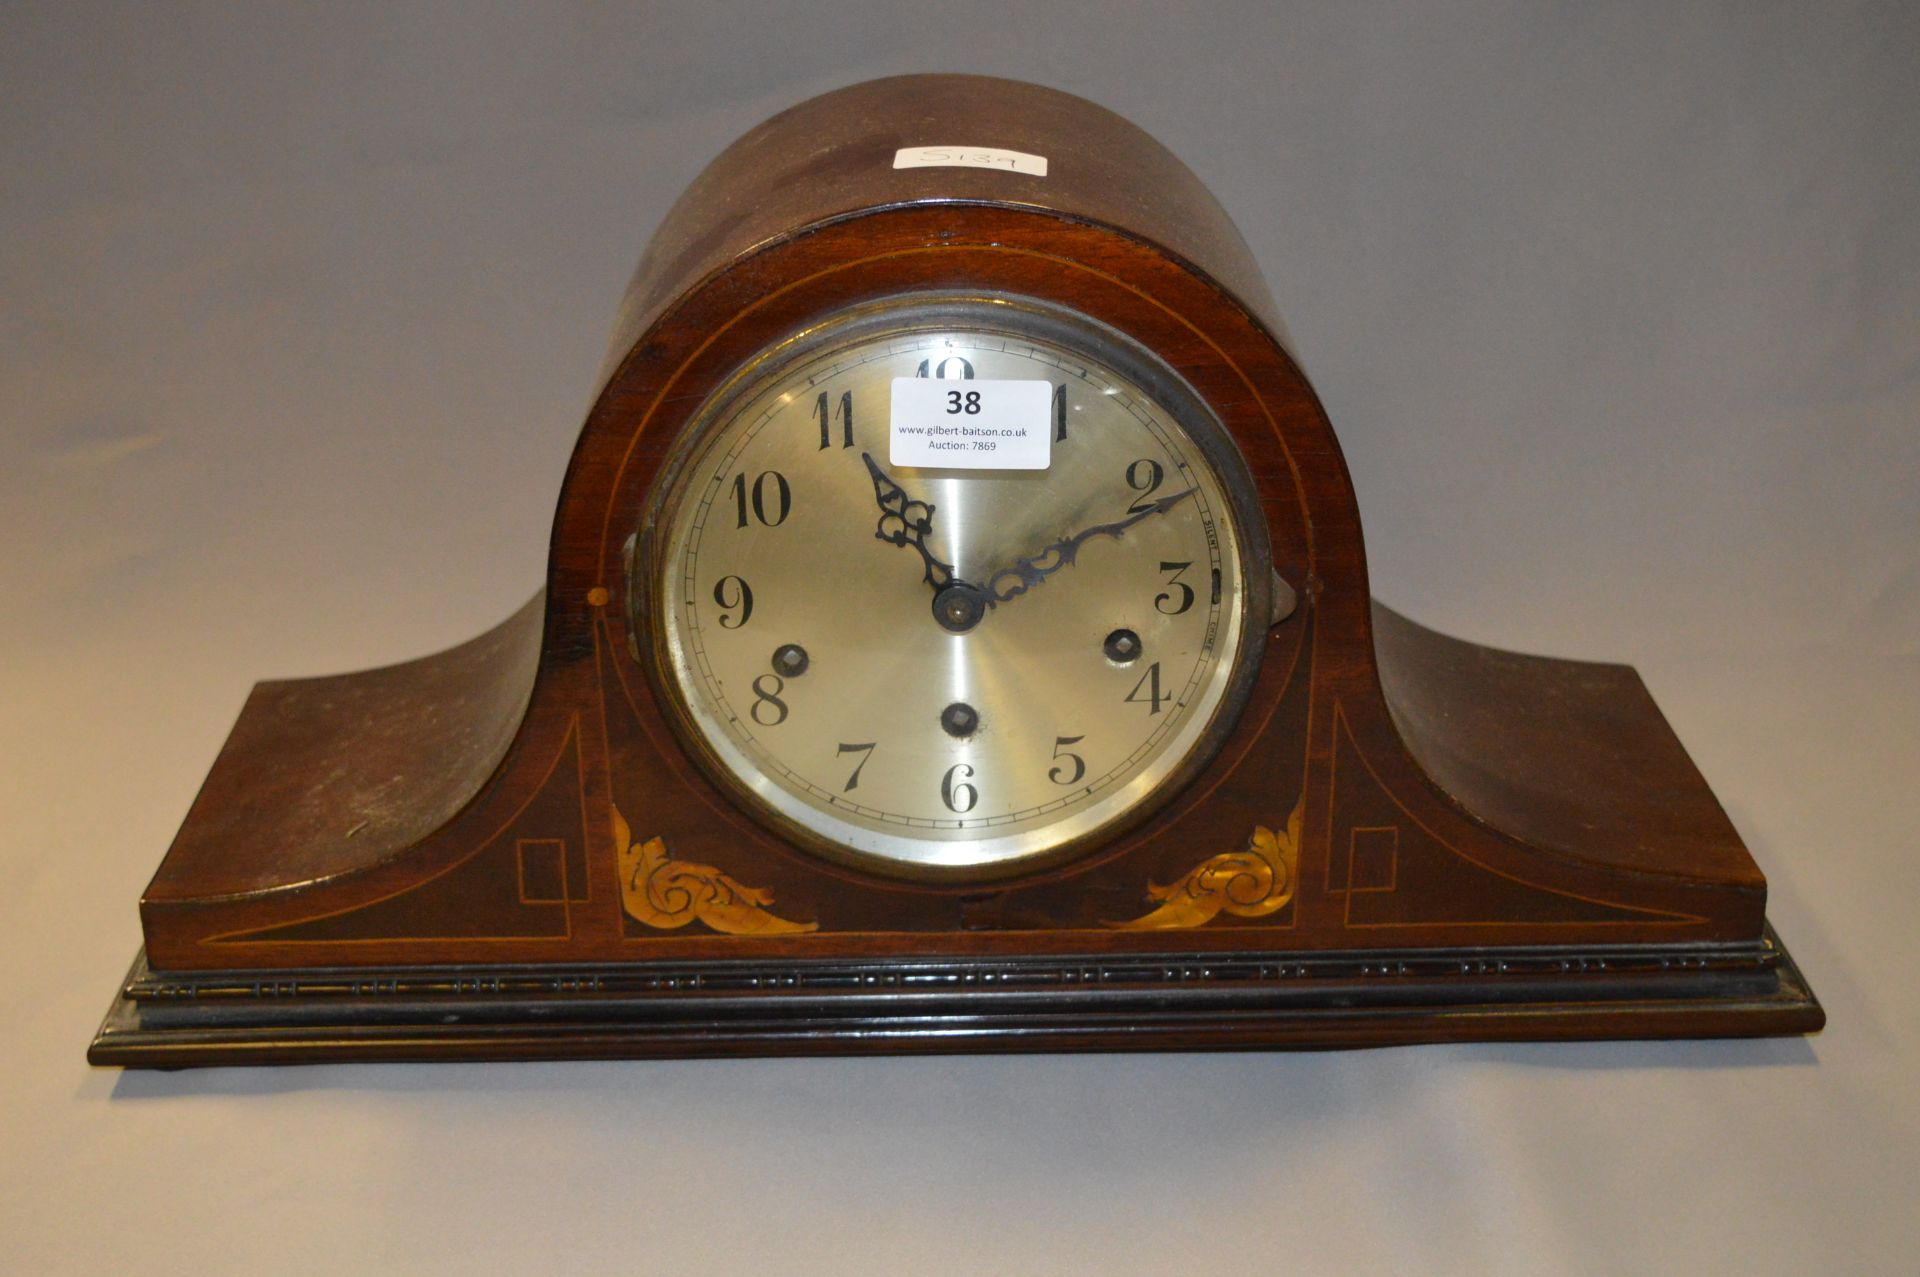 Inlaid Mantel Clock with Westminster Chimes